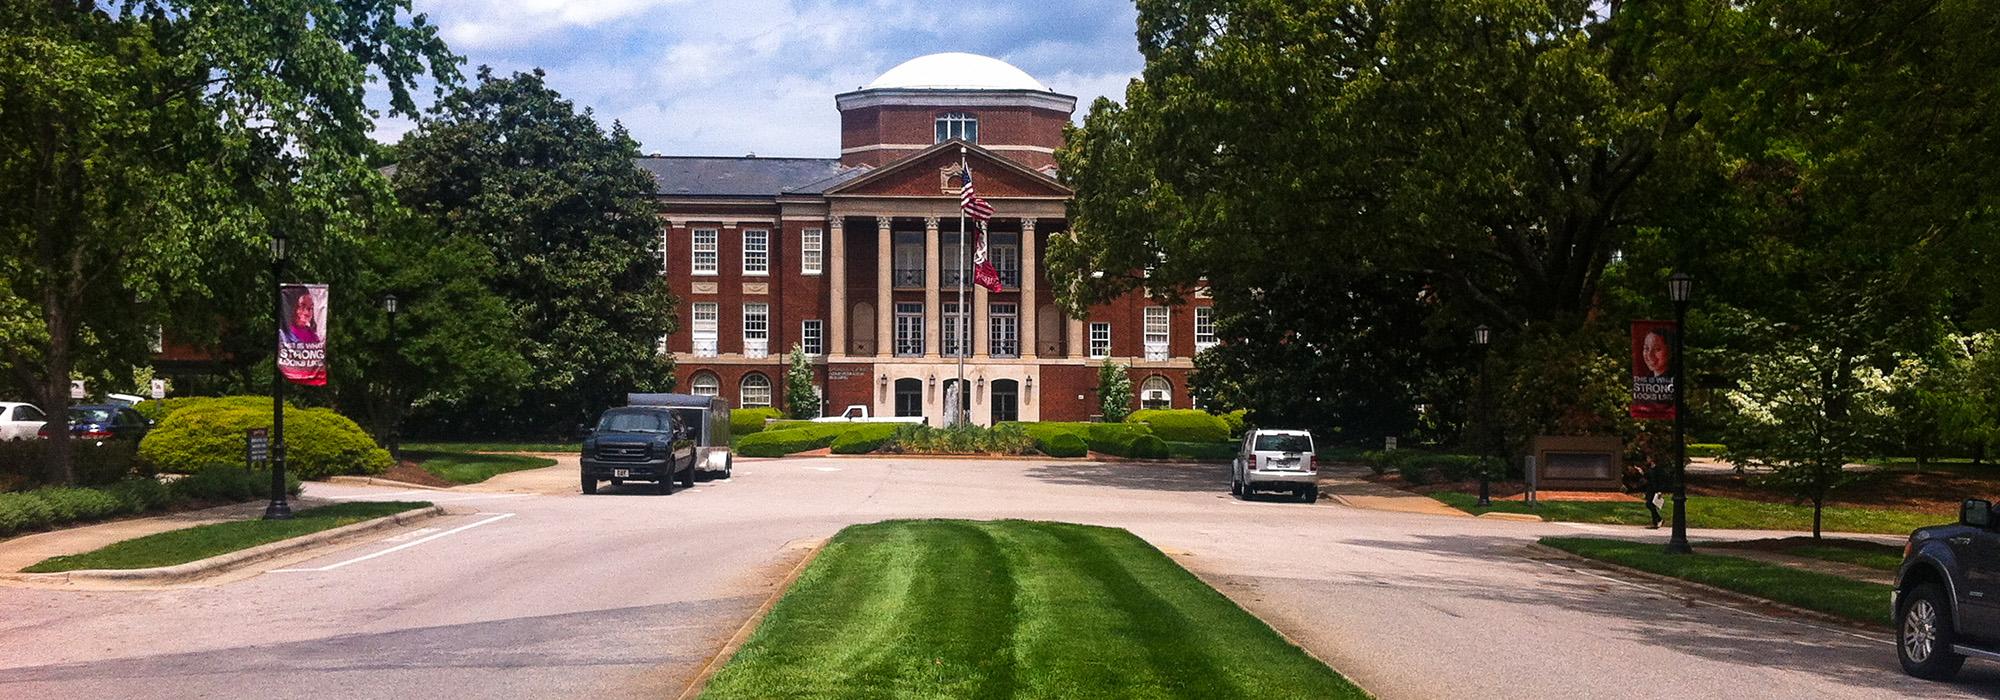 Meredith College, Raleigh, NC